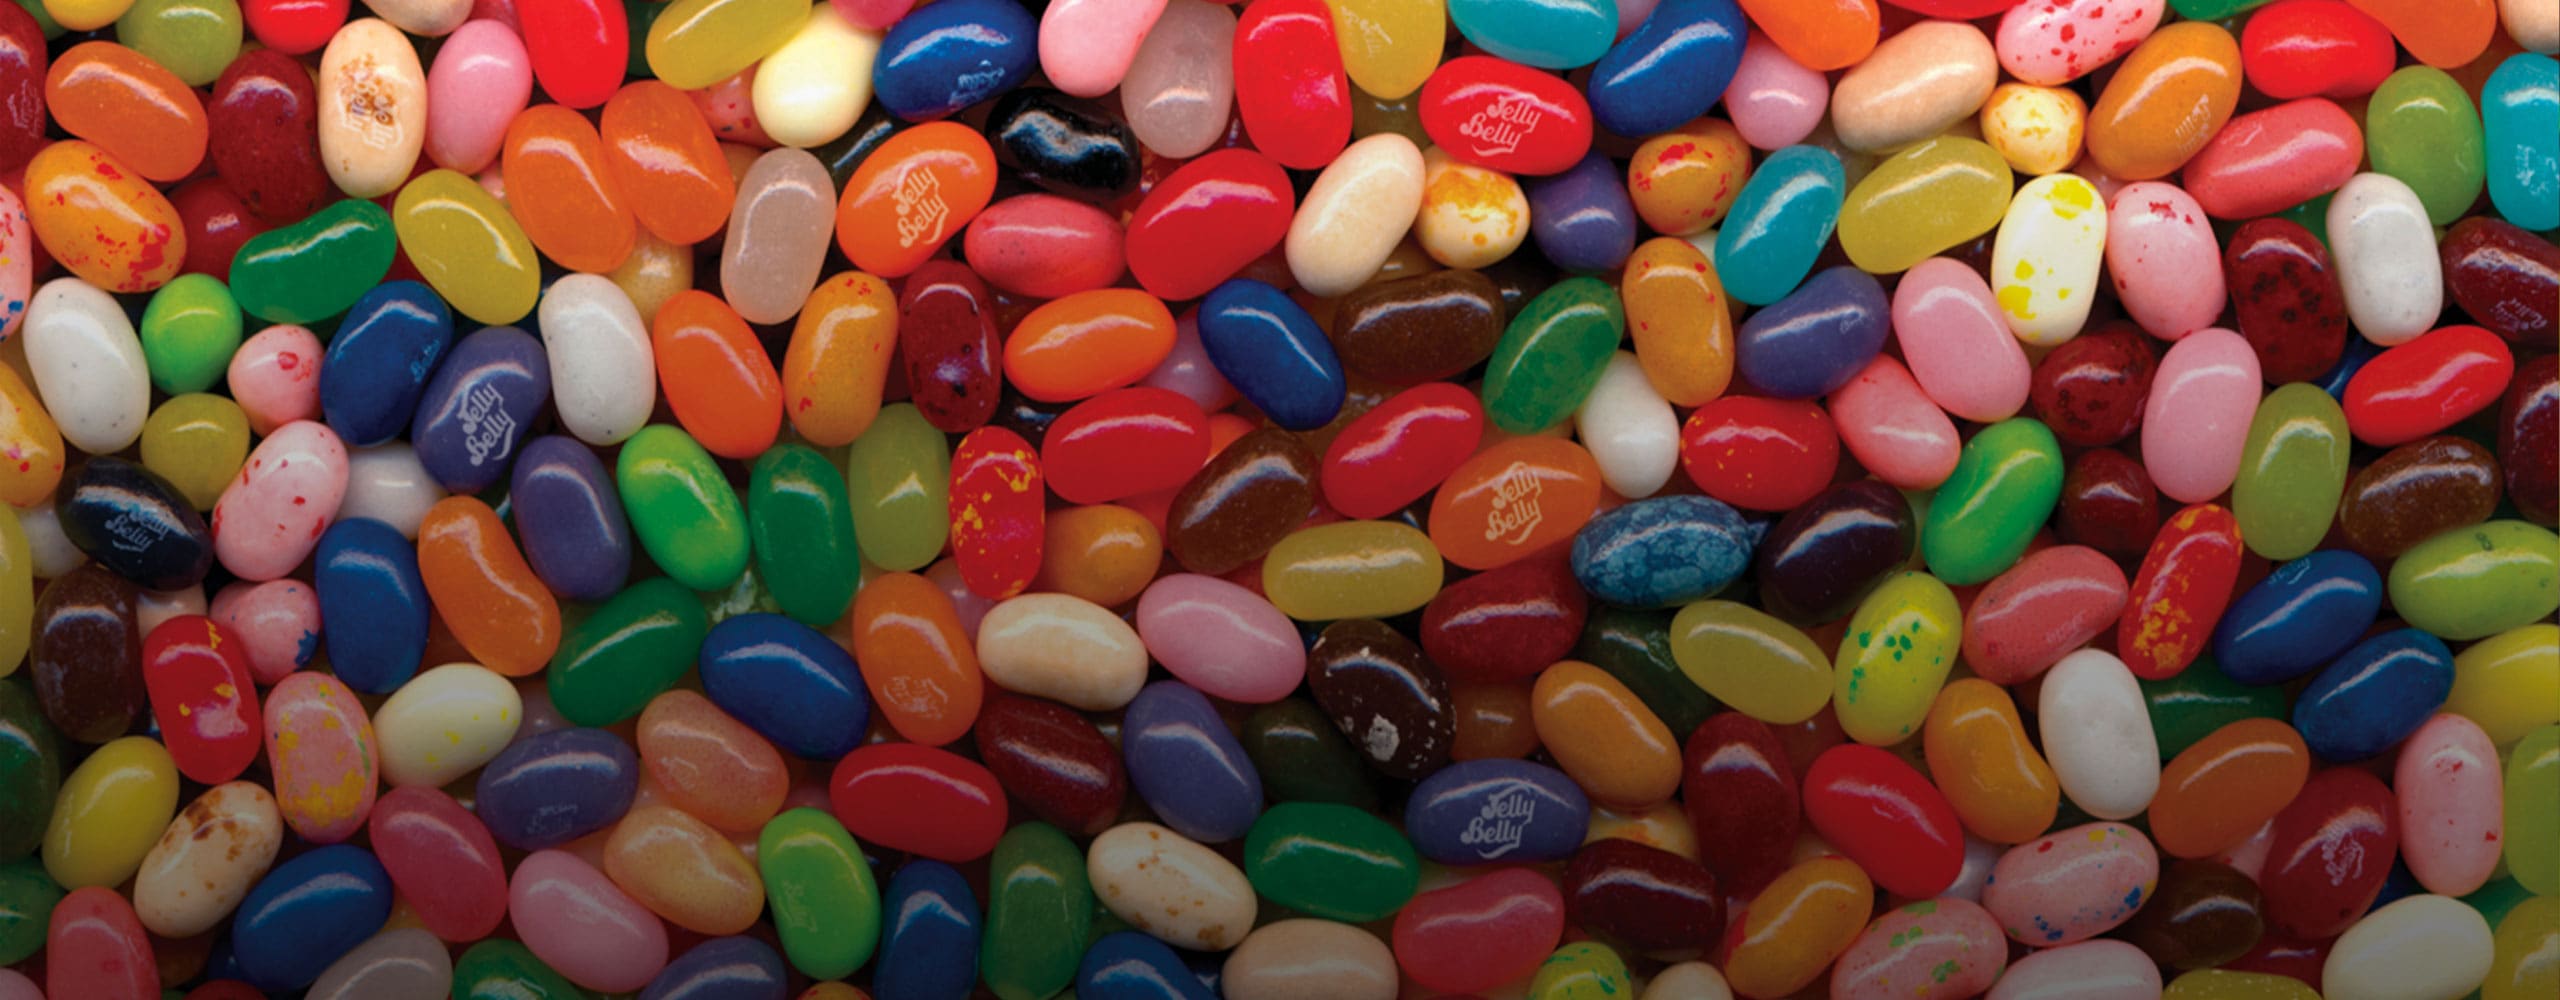 Jelly Belly Featured Image